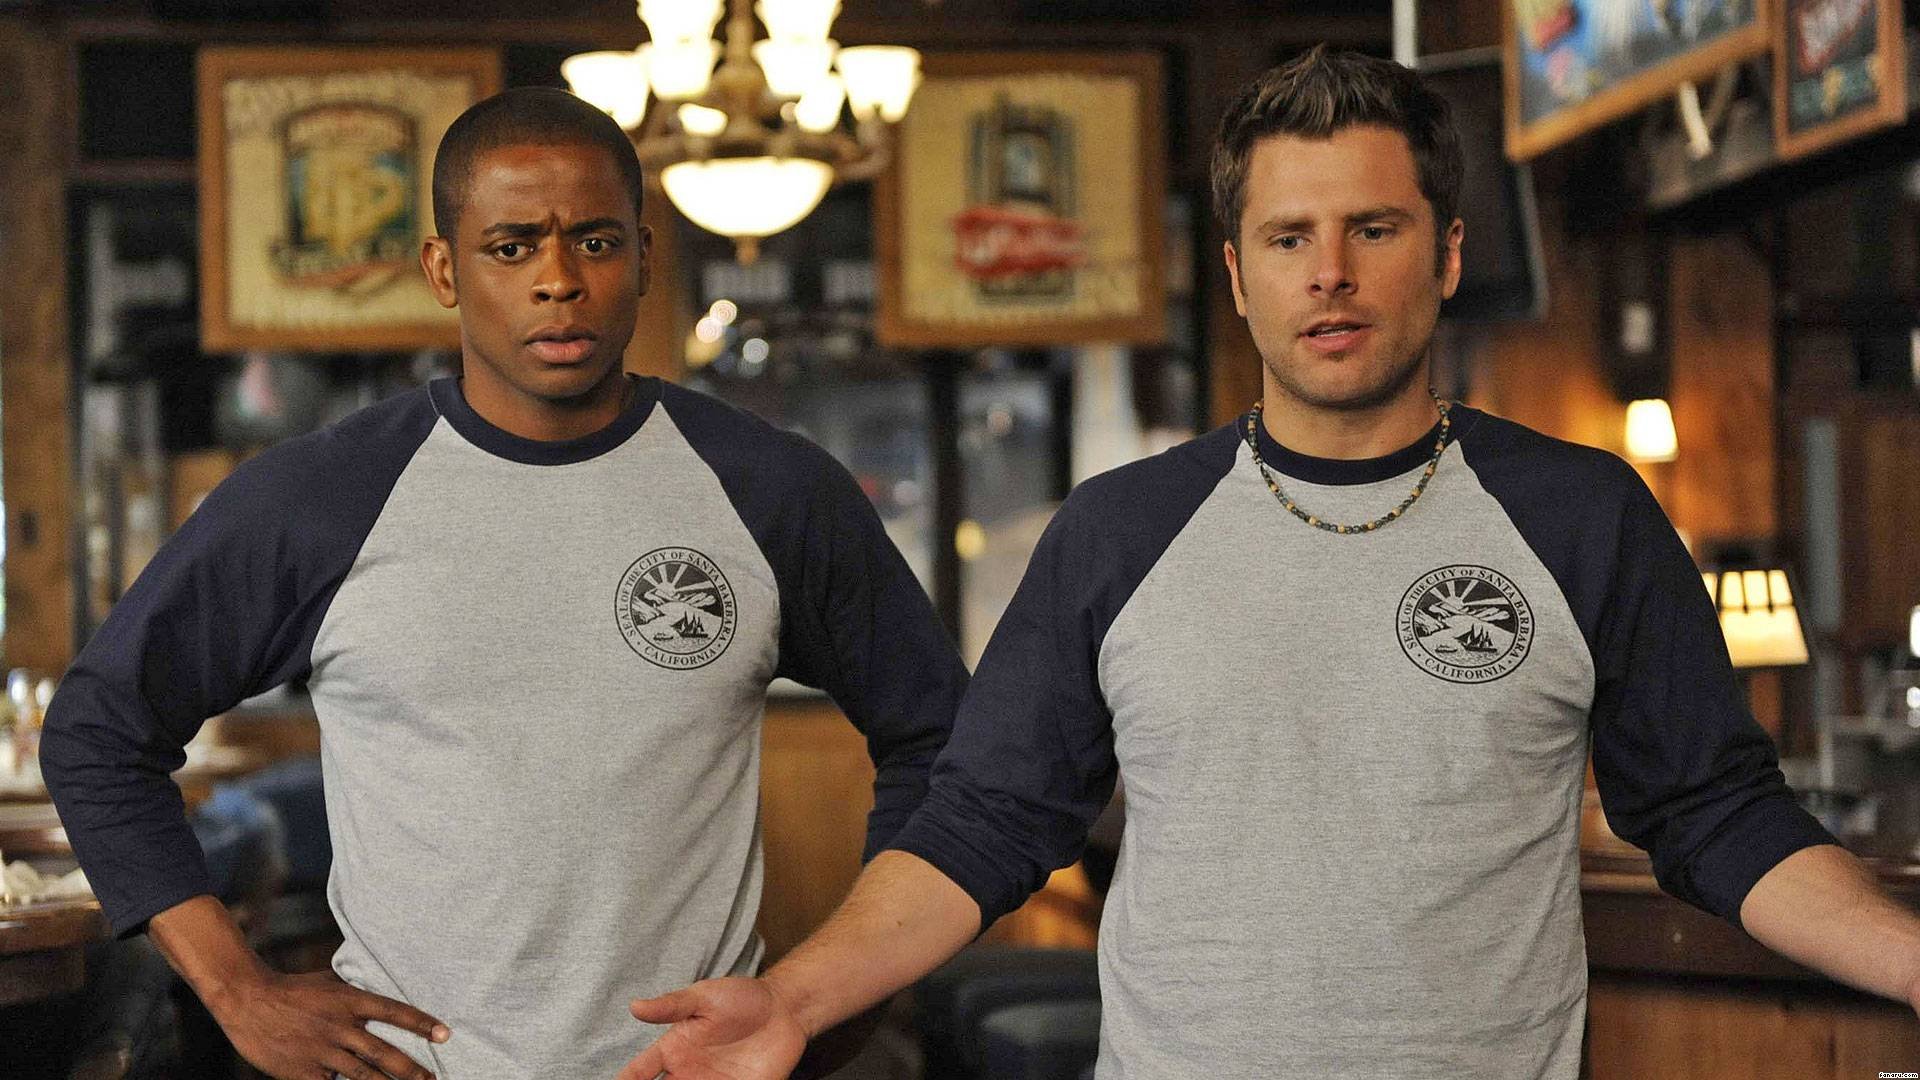 psych, Comedy, Crime, Mystery, Series Wallpaper